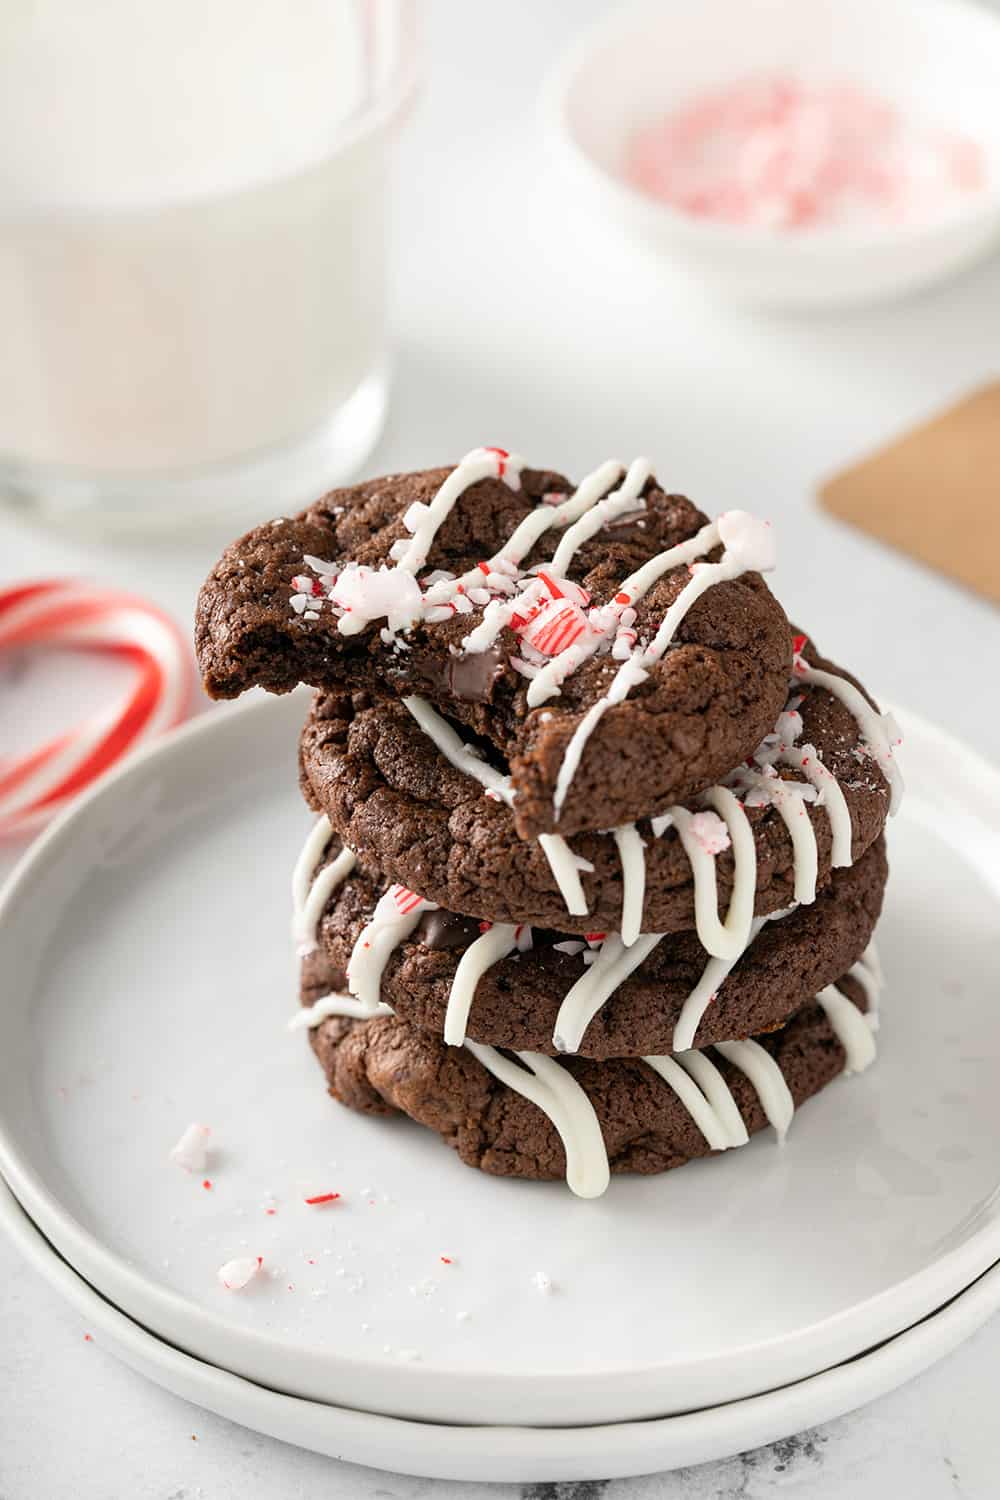 Four peppermint mocha cookies stacked on a white plate. The top cookie has a bite taken out of it